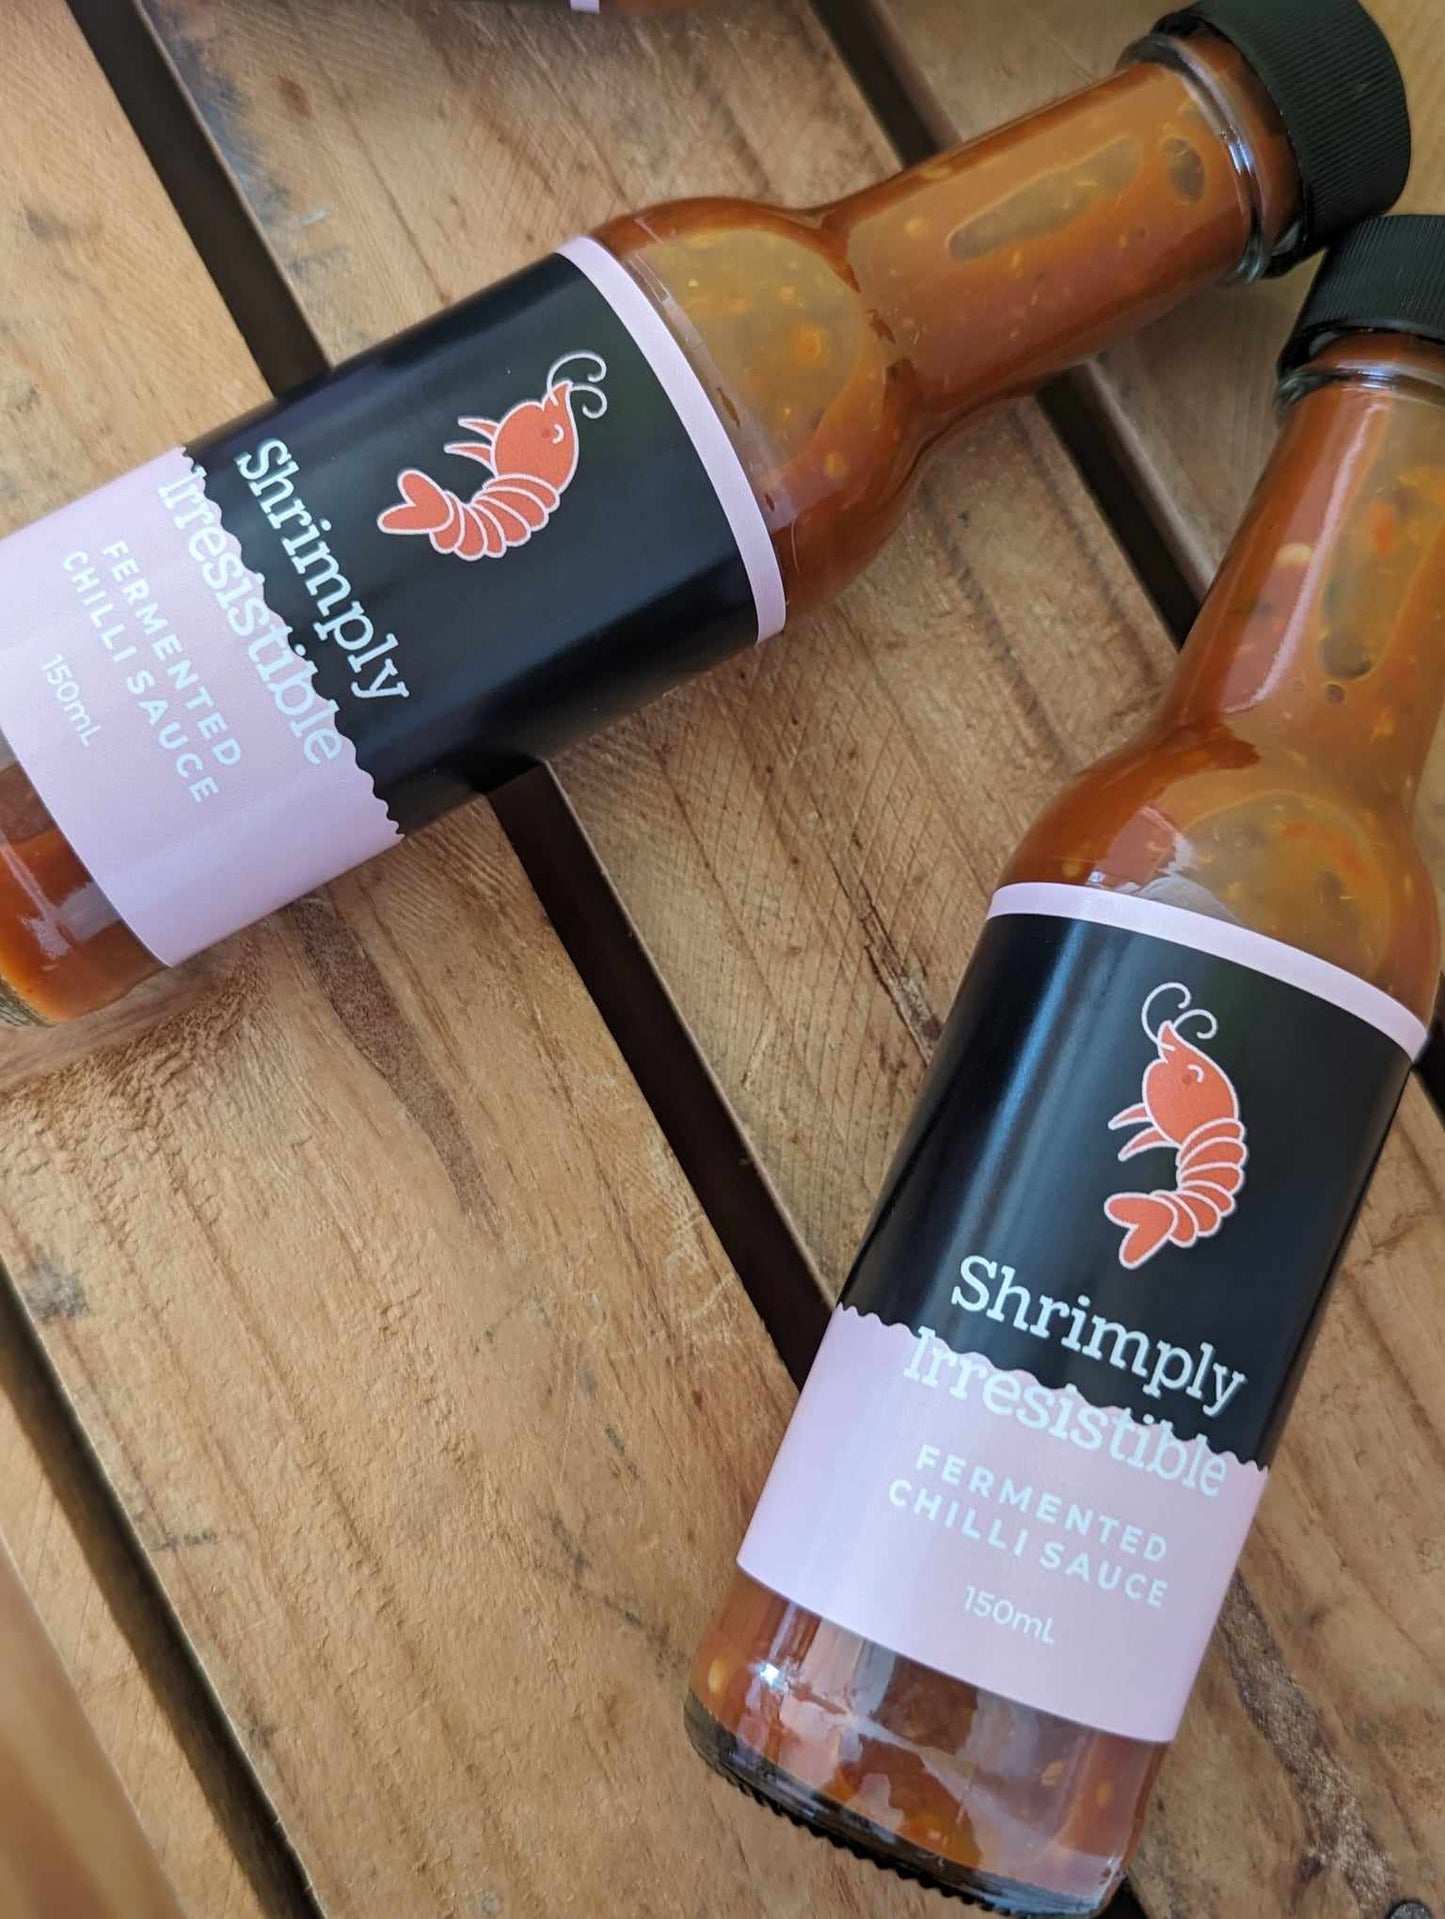 "Shrimply Irresistible" Fermented Chilli Sauce 150ml